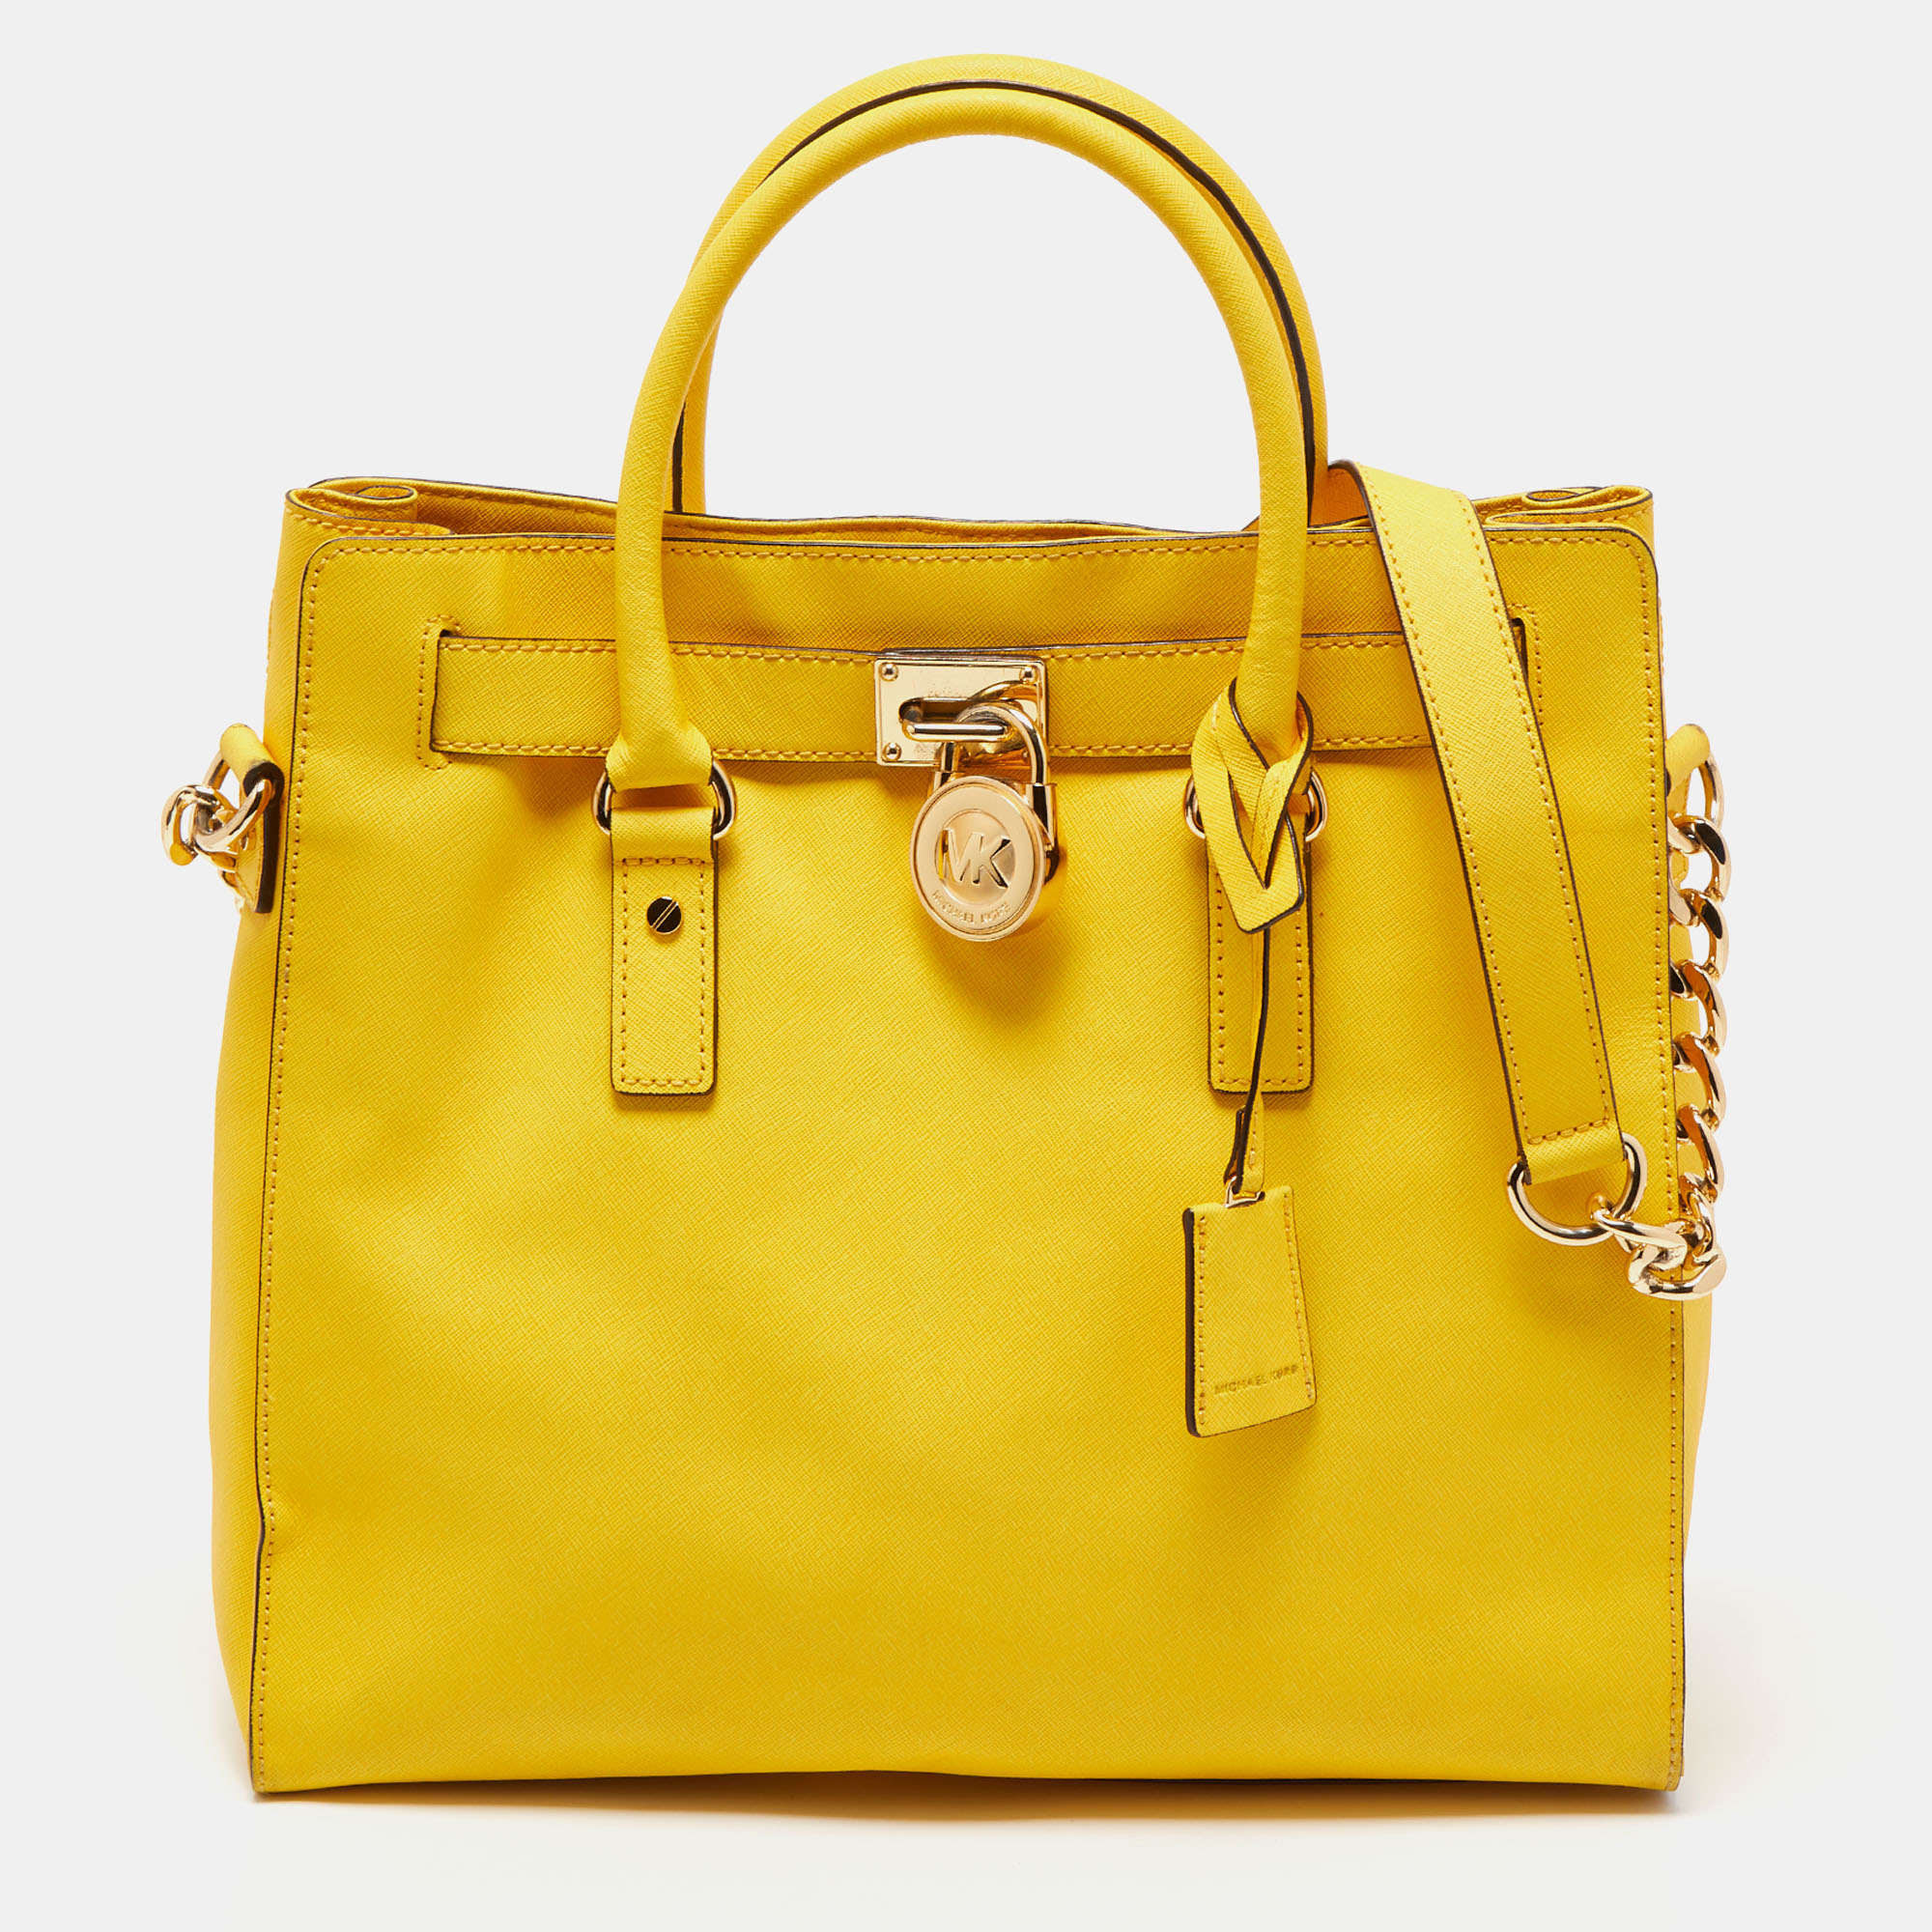 Pre-owned Michael Michael Kors Yellow Saffiano Leather Hamilton North South Tote